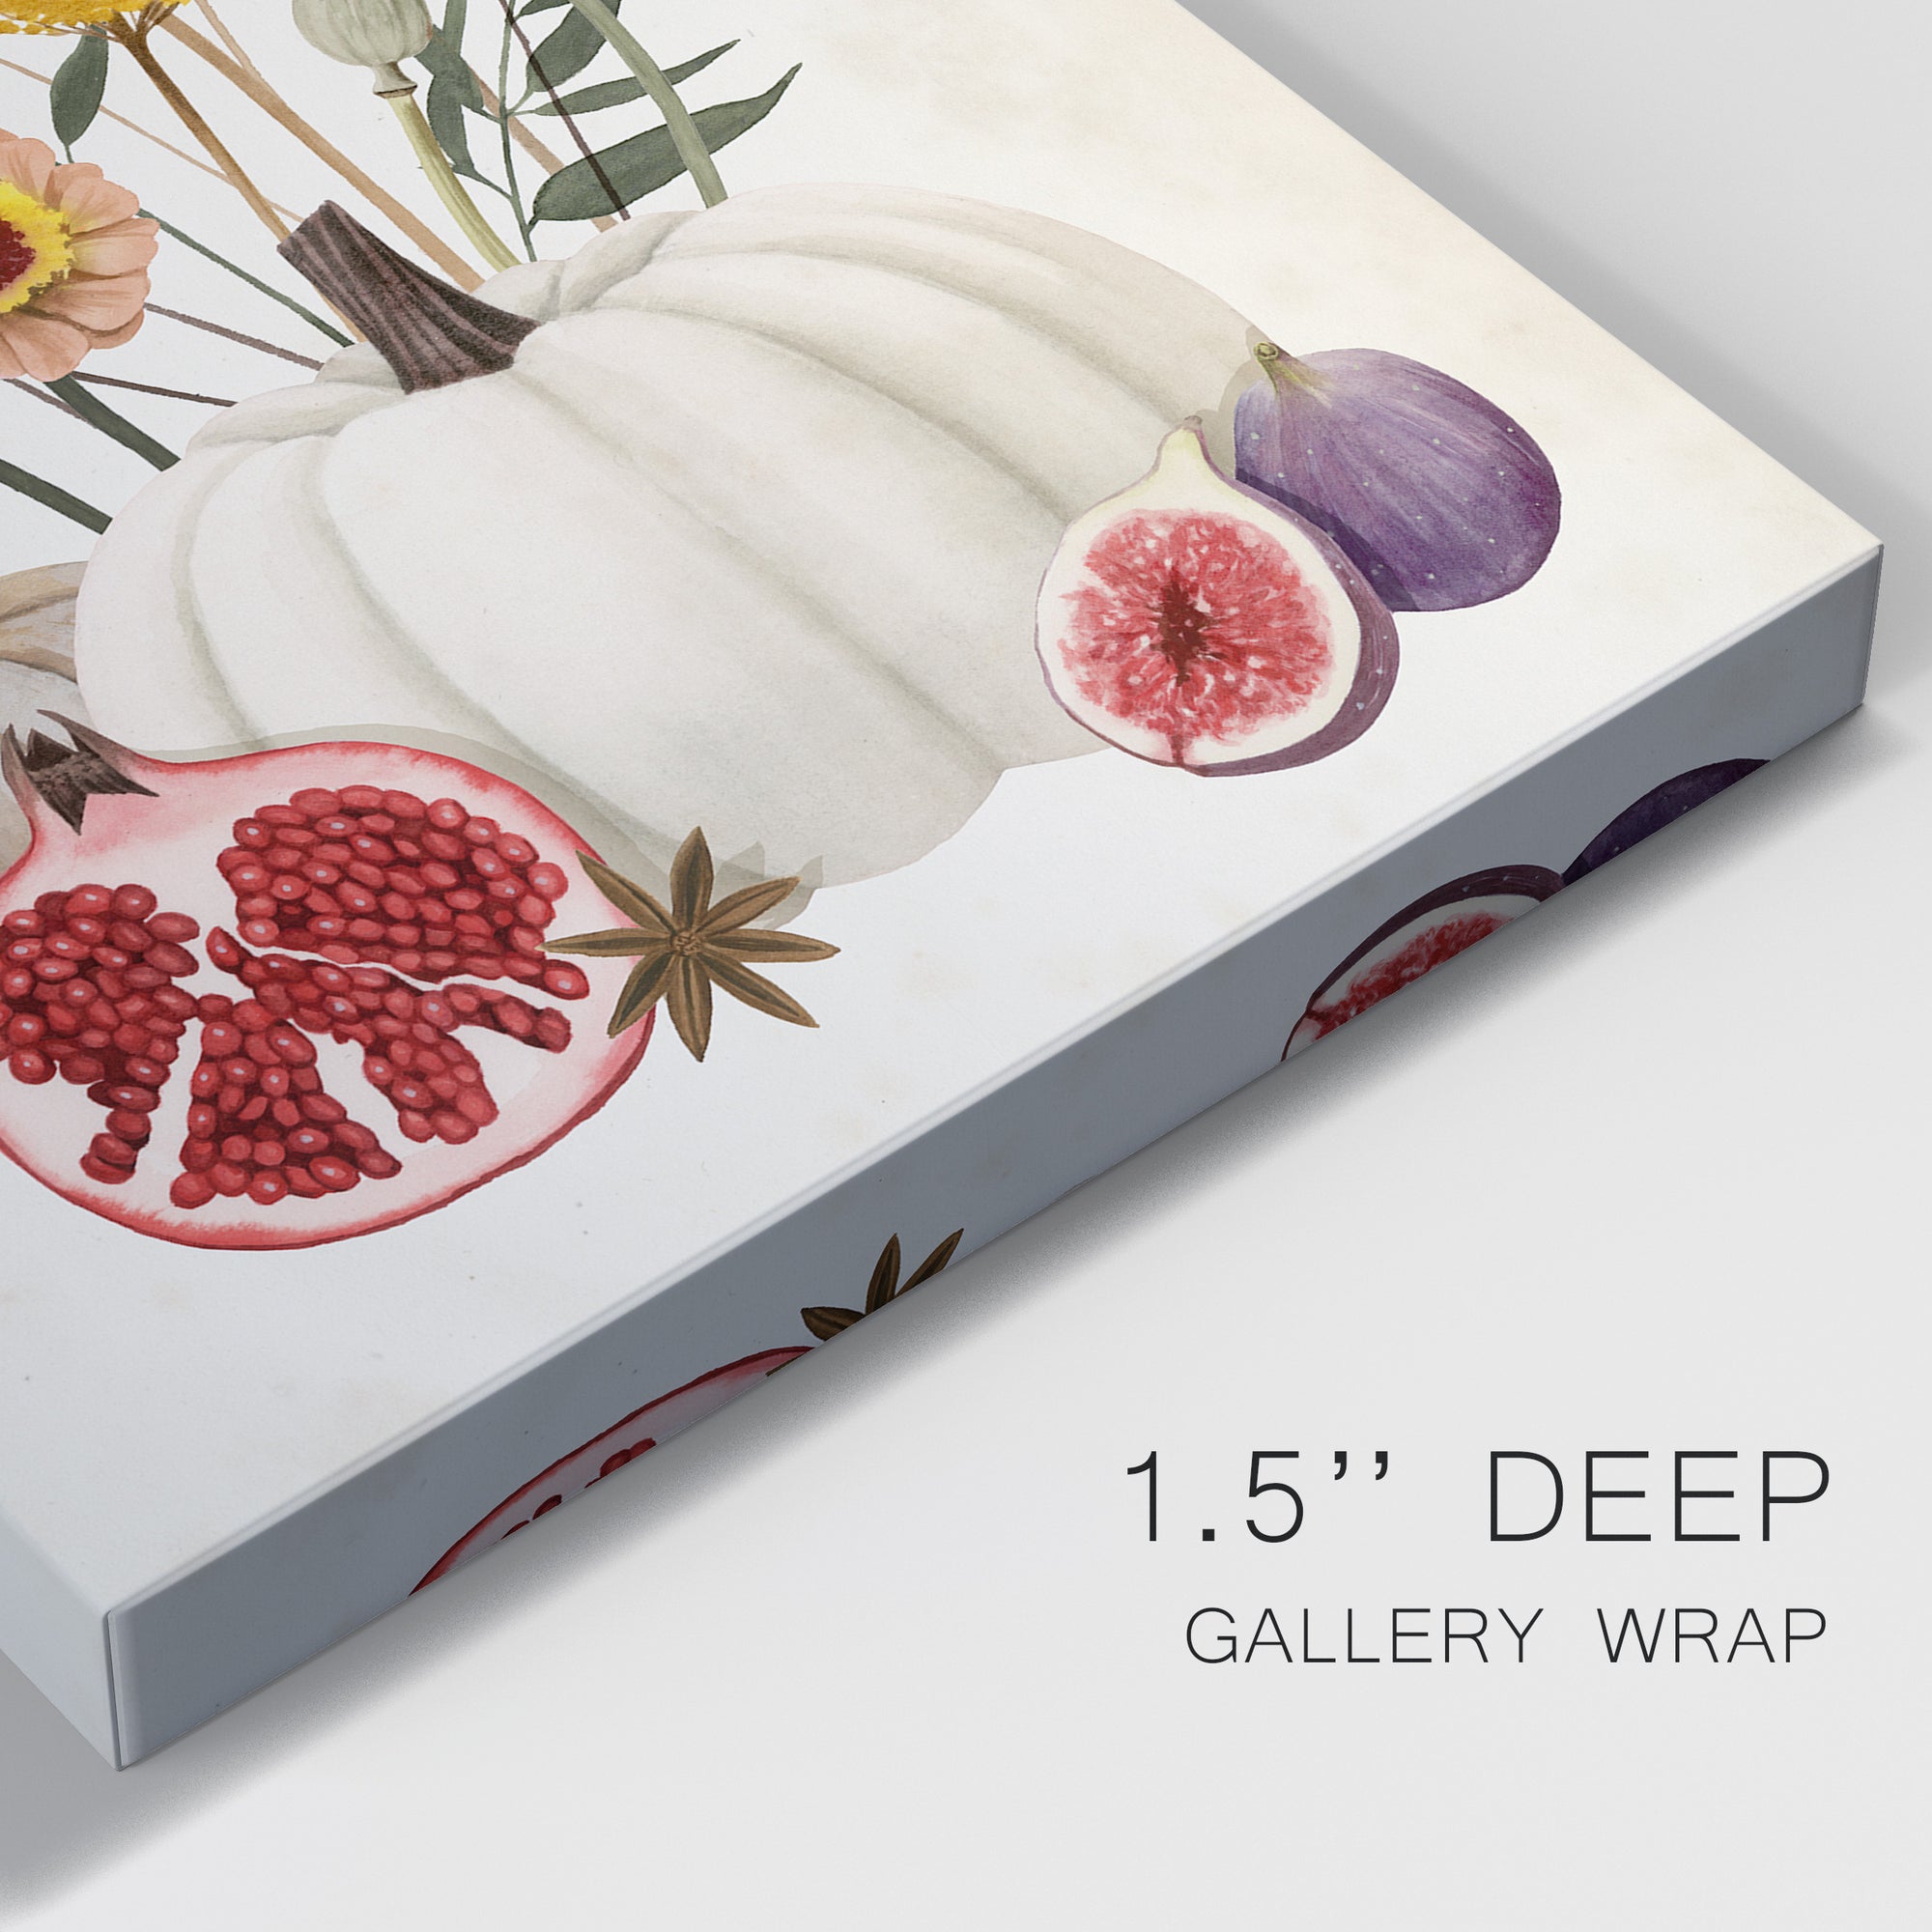 Fall Botanicals I Premium Gallery Wrapped Canvas - Ready to Hang